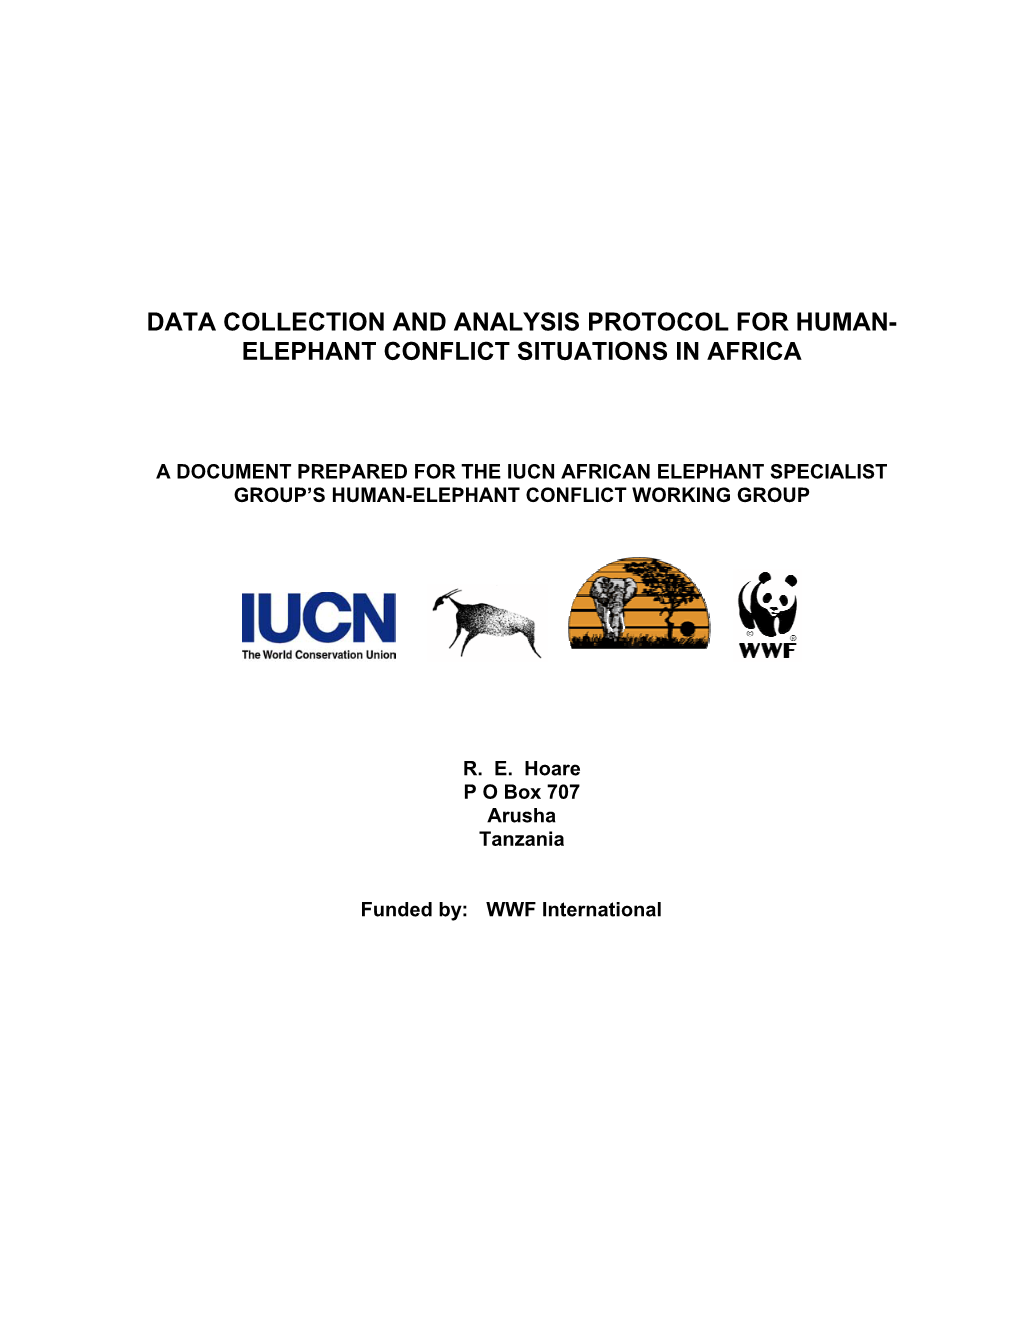 Data Collection and Analysis Protocol for Human- Elephant Conflict Situations in Africa